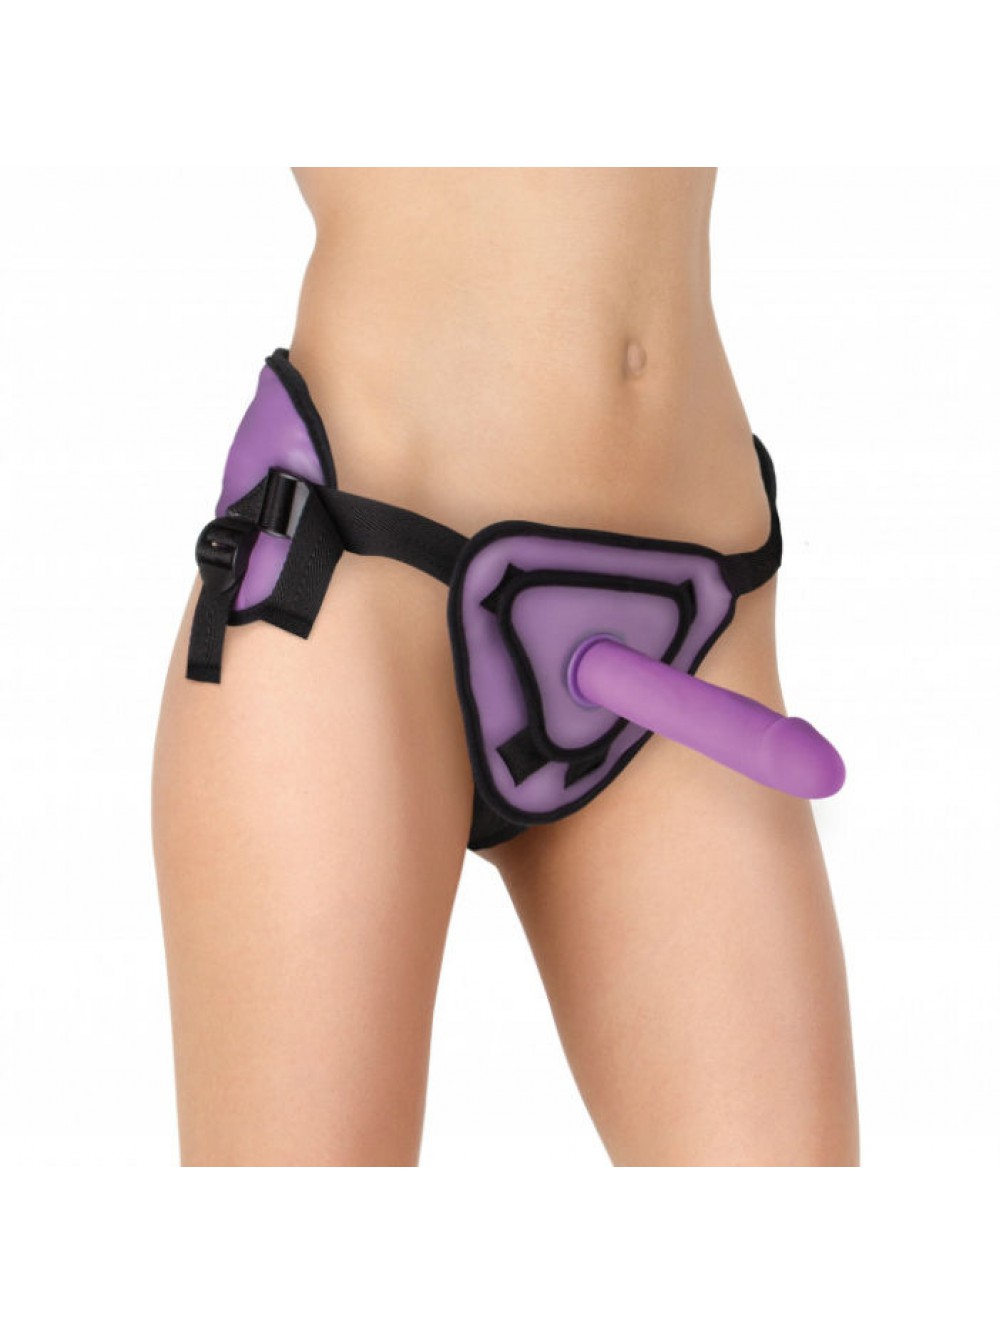 OUCH DELUXE STRAP ON SILICONE DELUXE PURPLE  20.5  CM